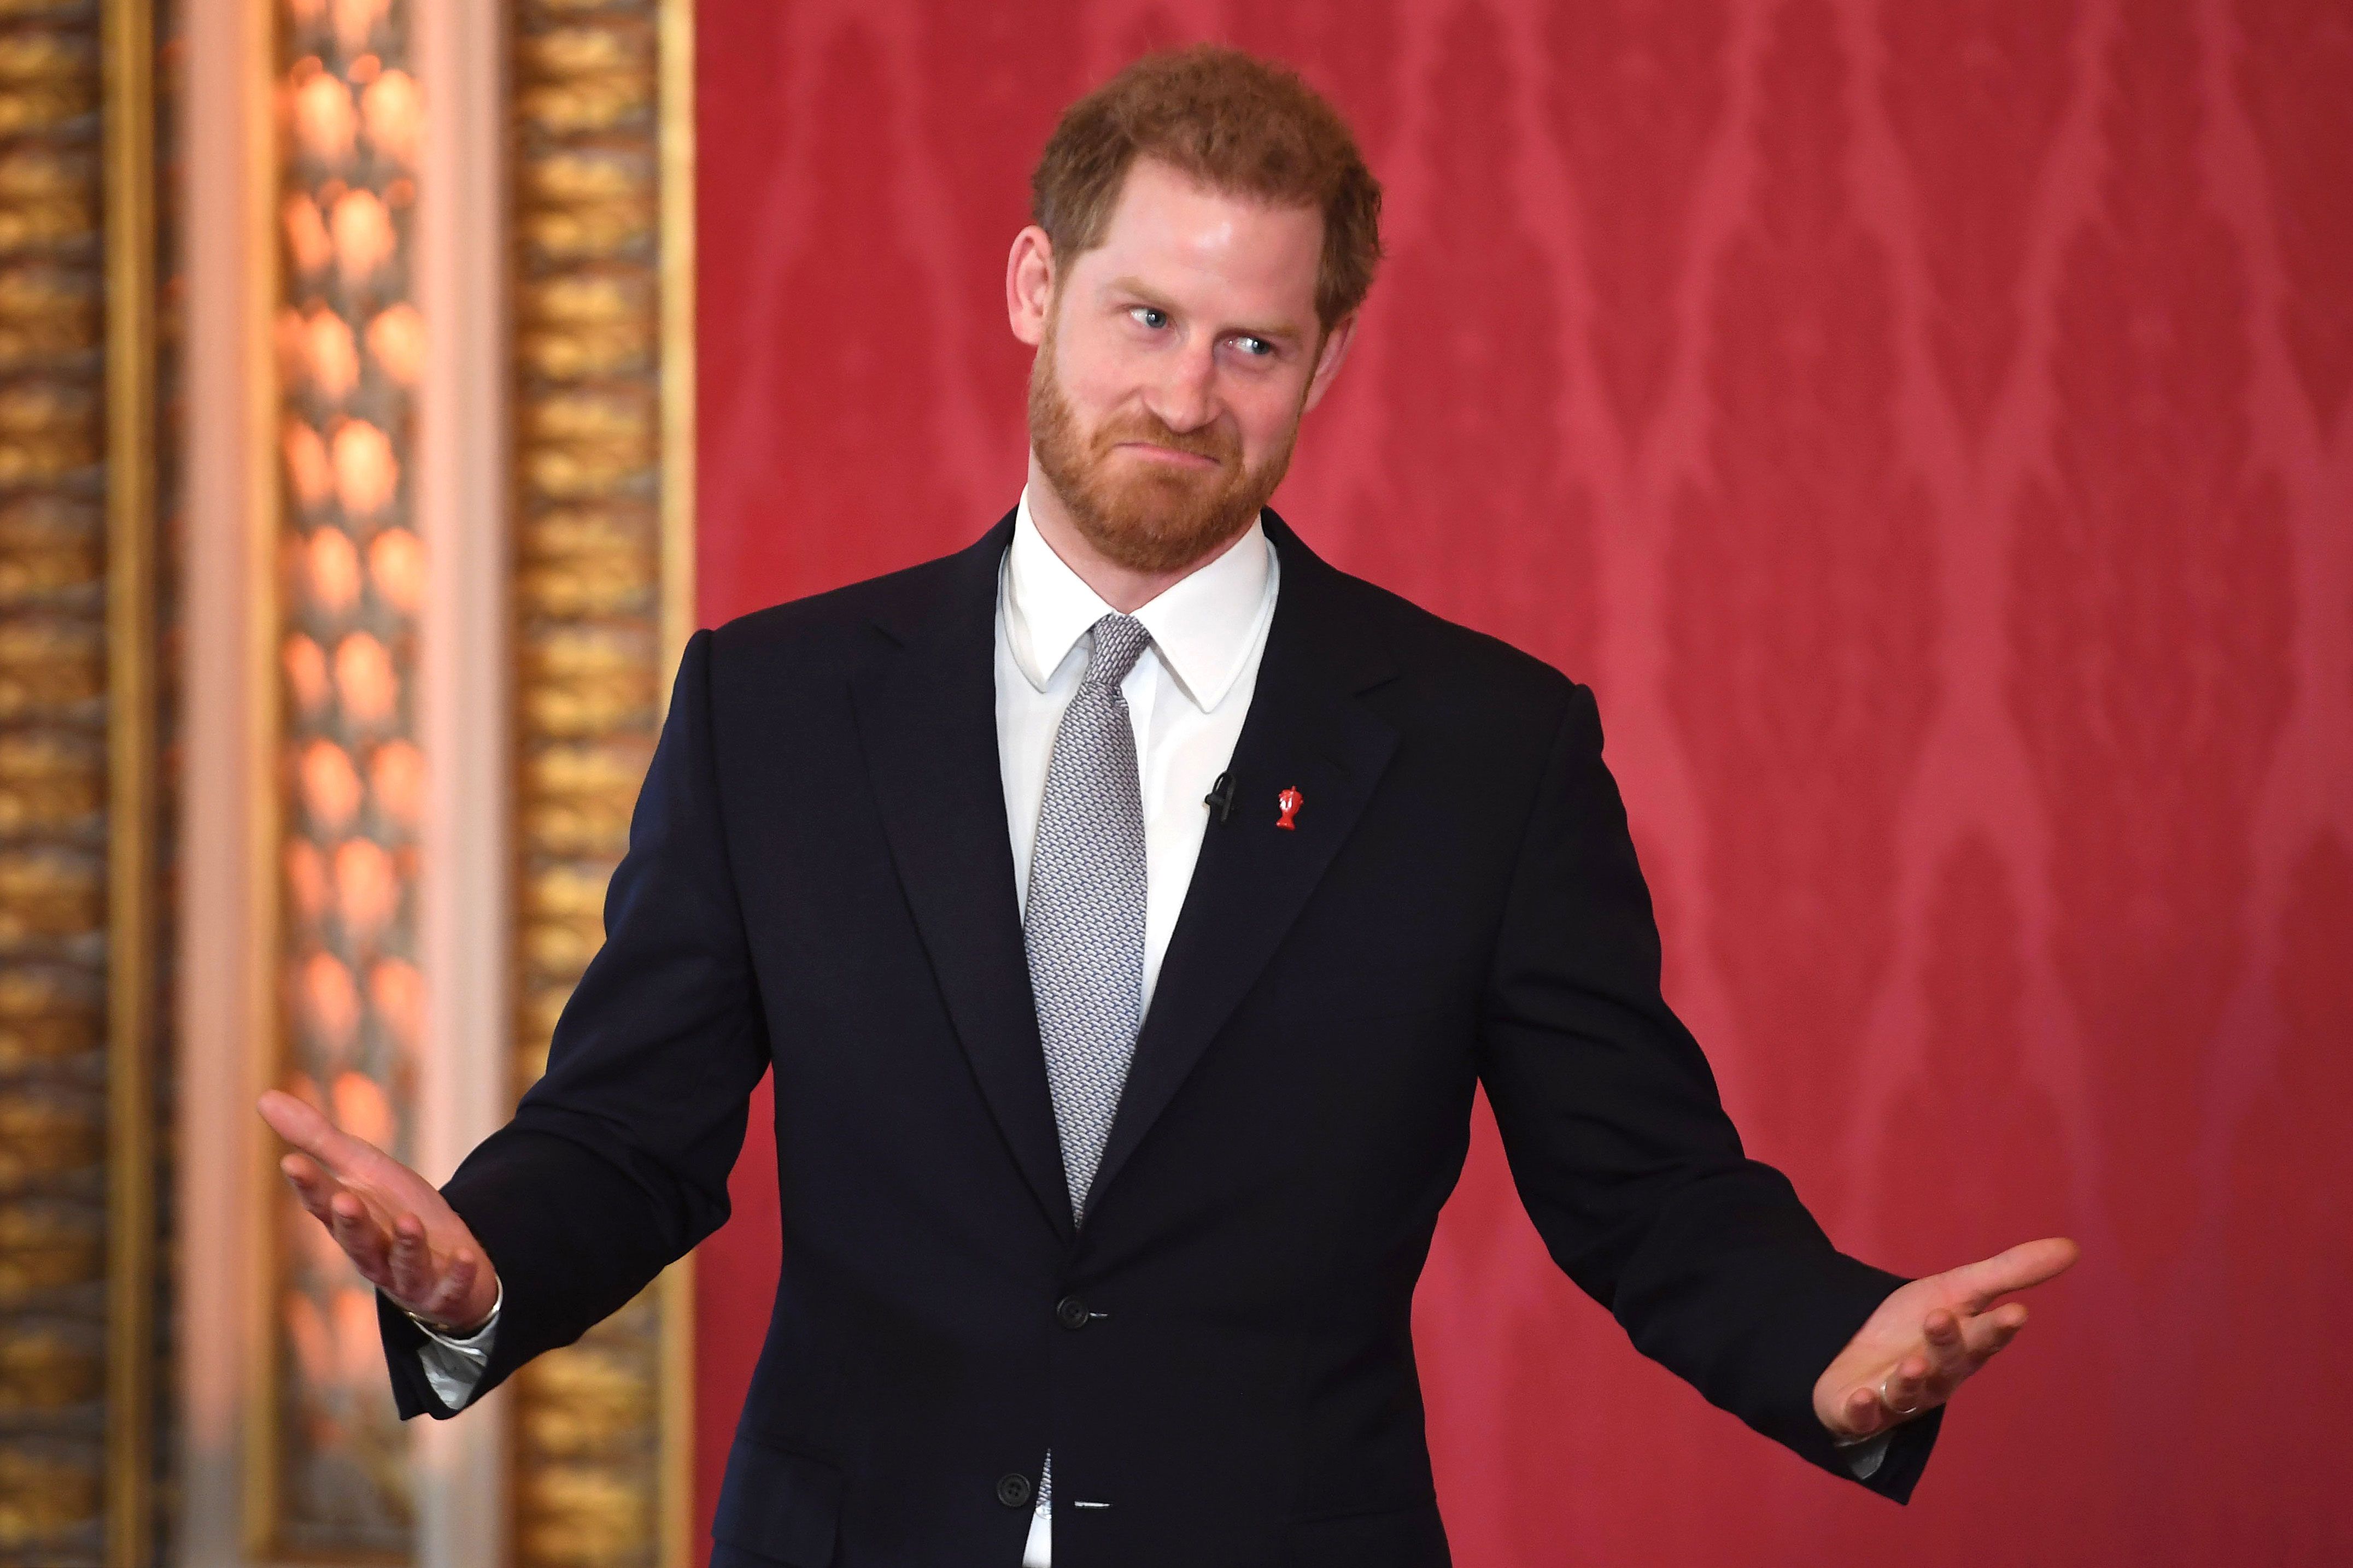 MEG AND I ARE NOT ANGRY': Prince Harry begged father-in-law to call him  before wedding, document shows